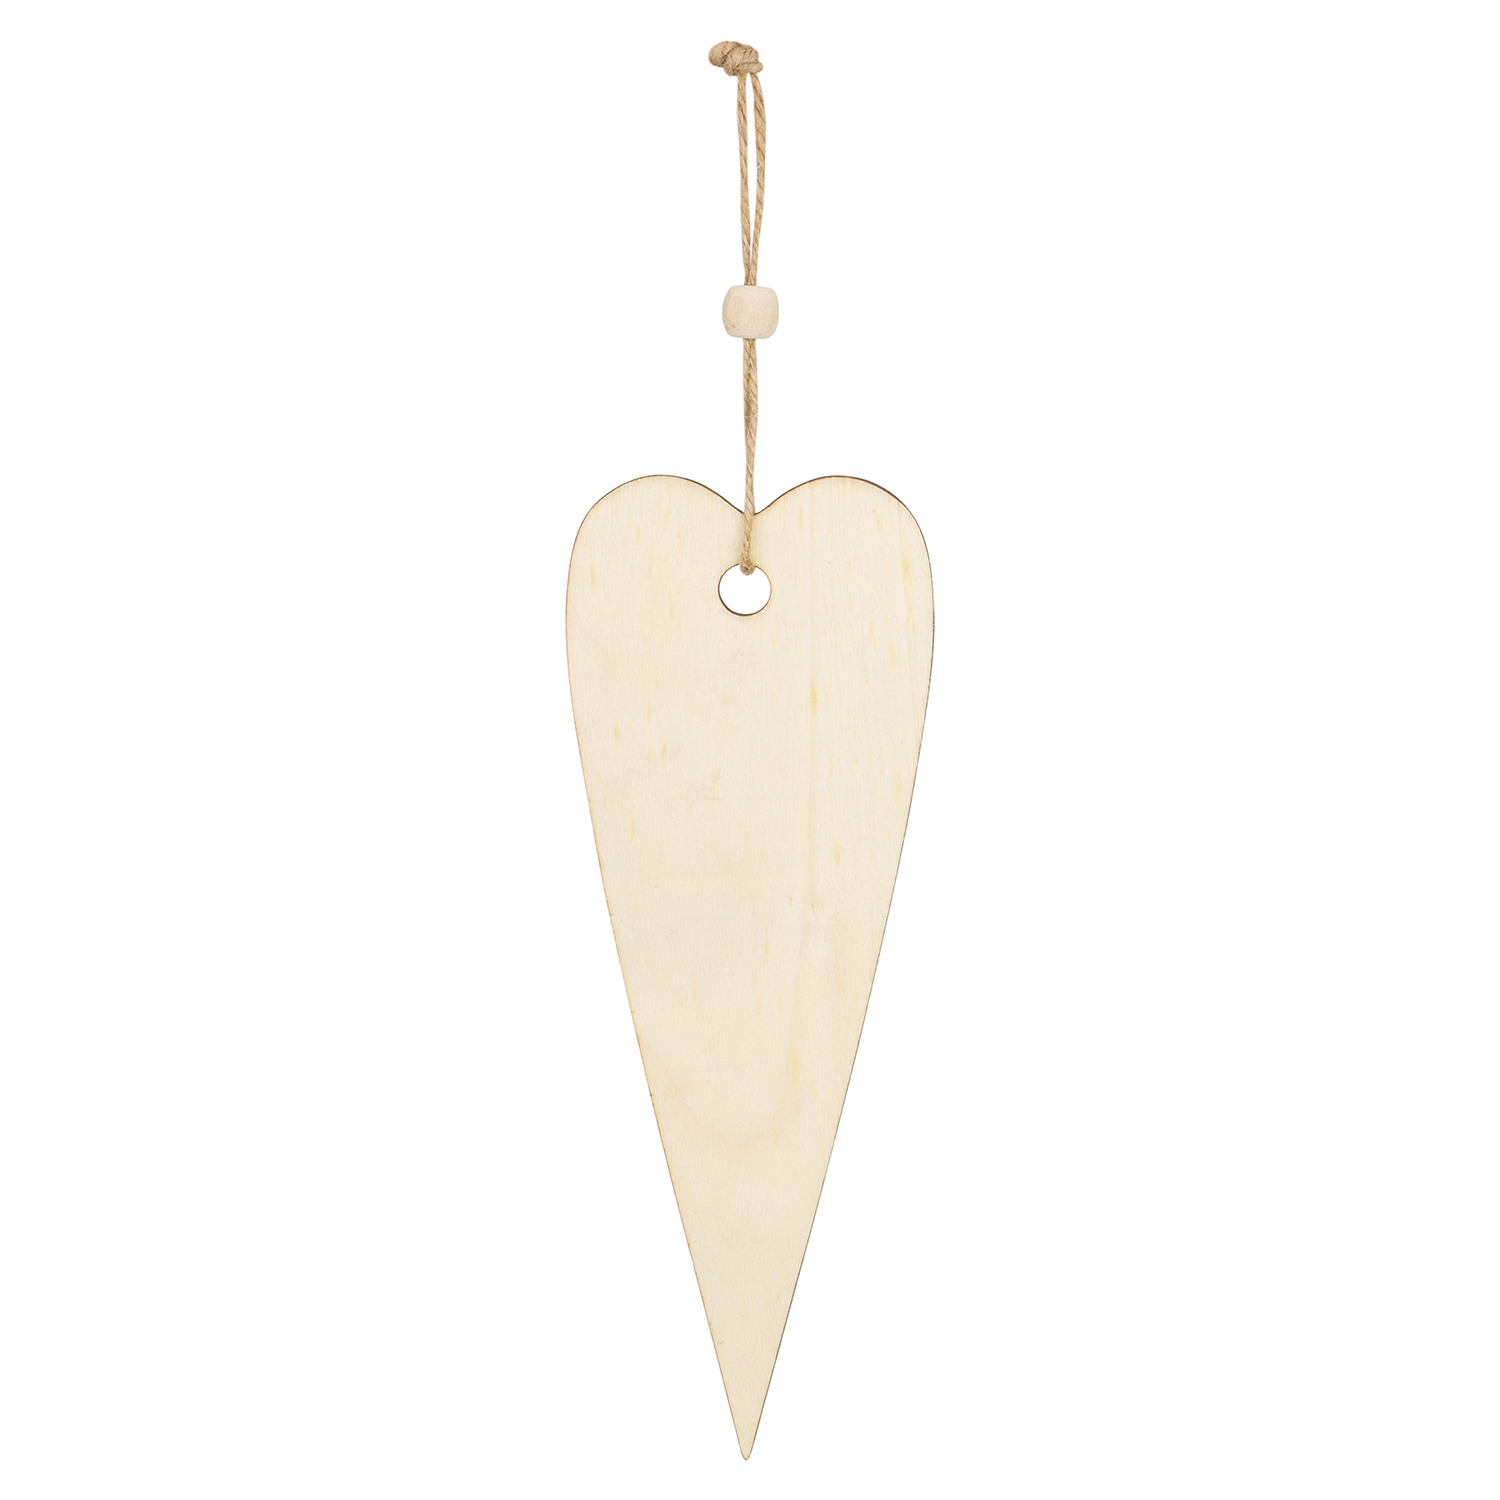 Wooden Ornament Hanging Decoration Image 2